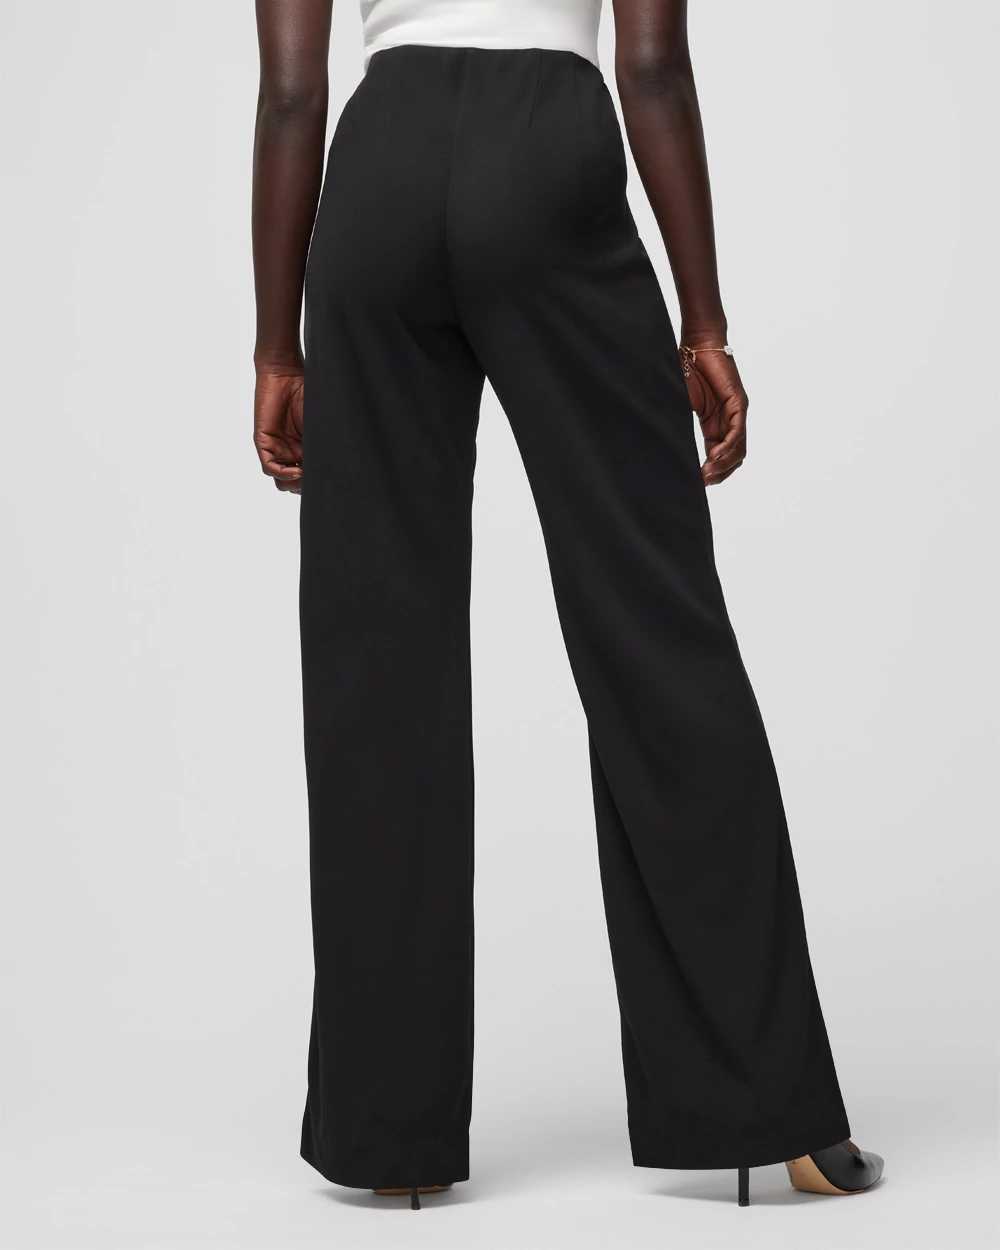 Curvy WHBM® Slip On Wide Leg Pant click to view larger image.